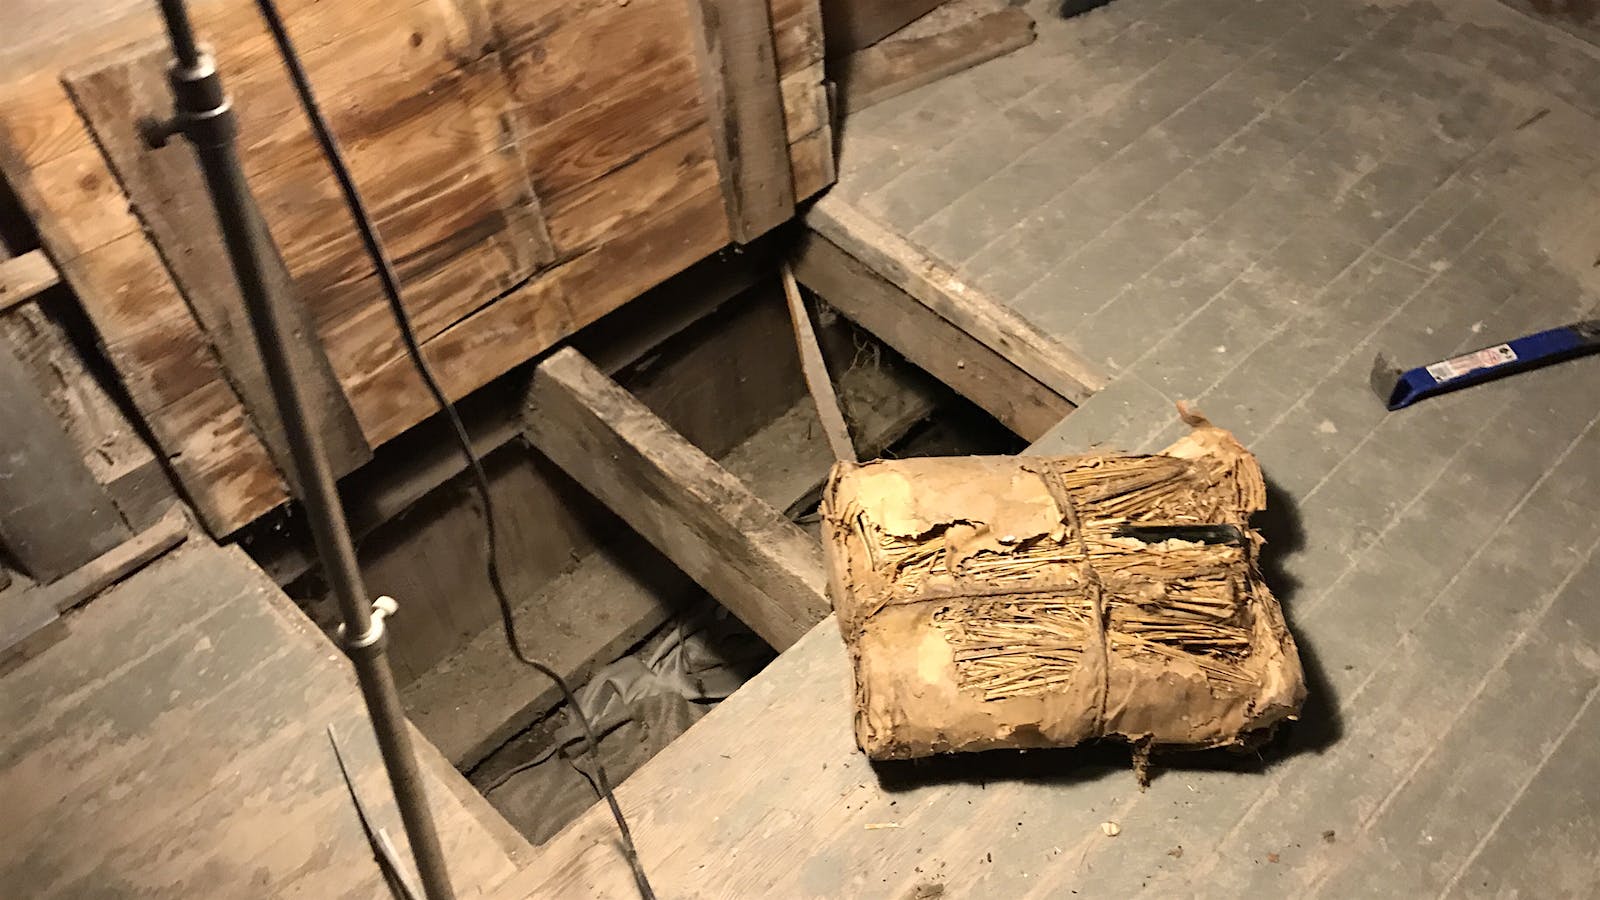 A New Discovery of Very Smuggled, Very Old Old Smuggler